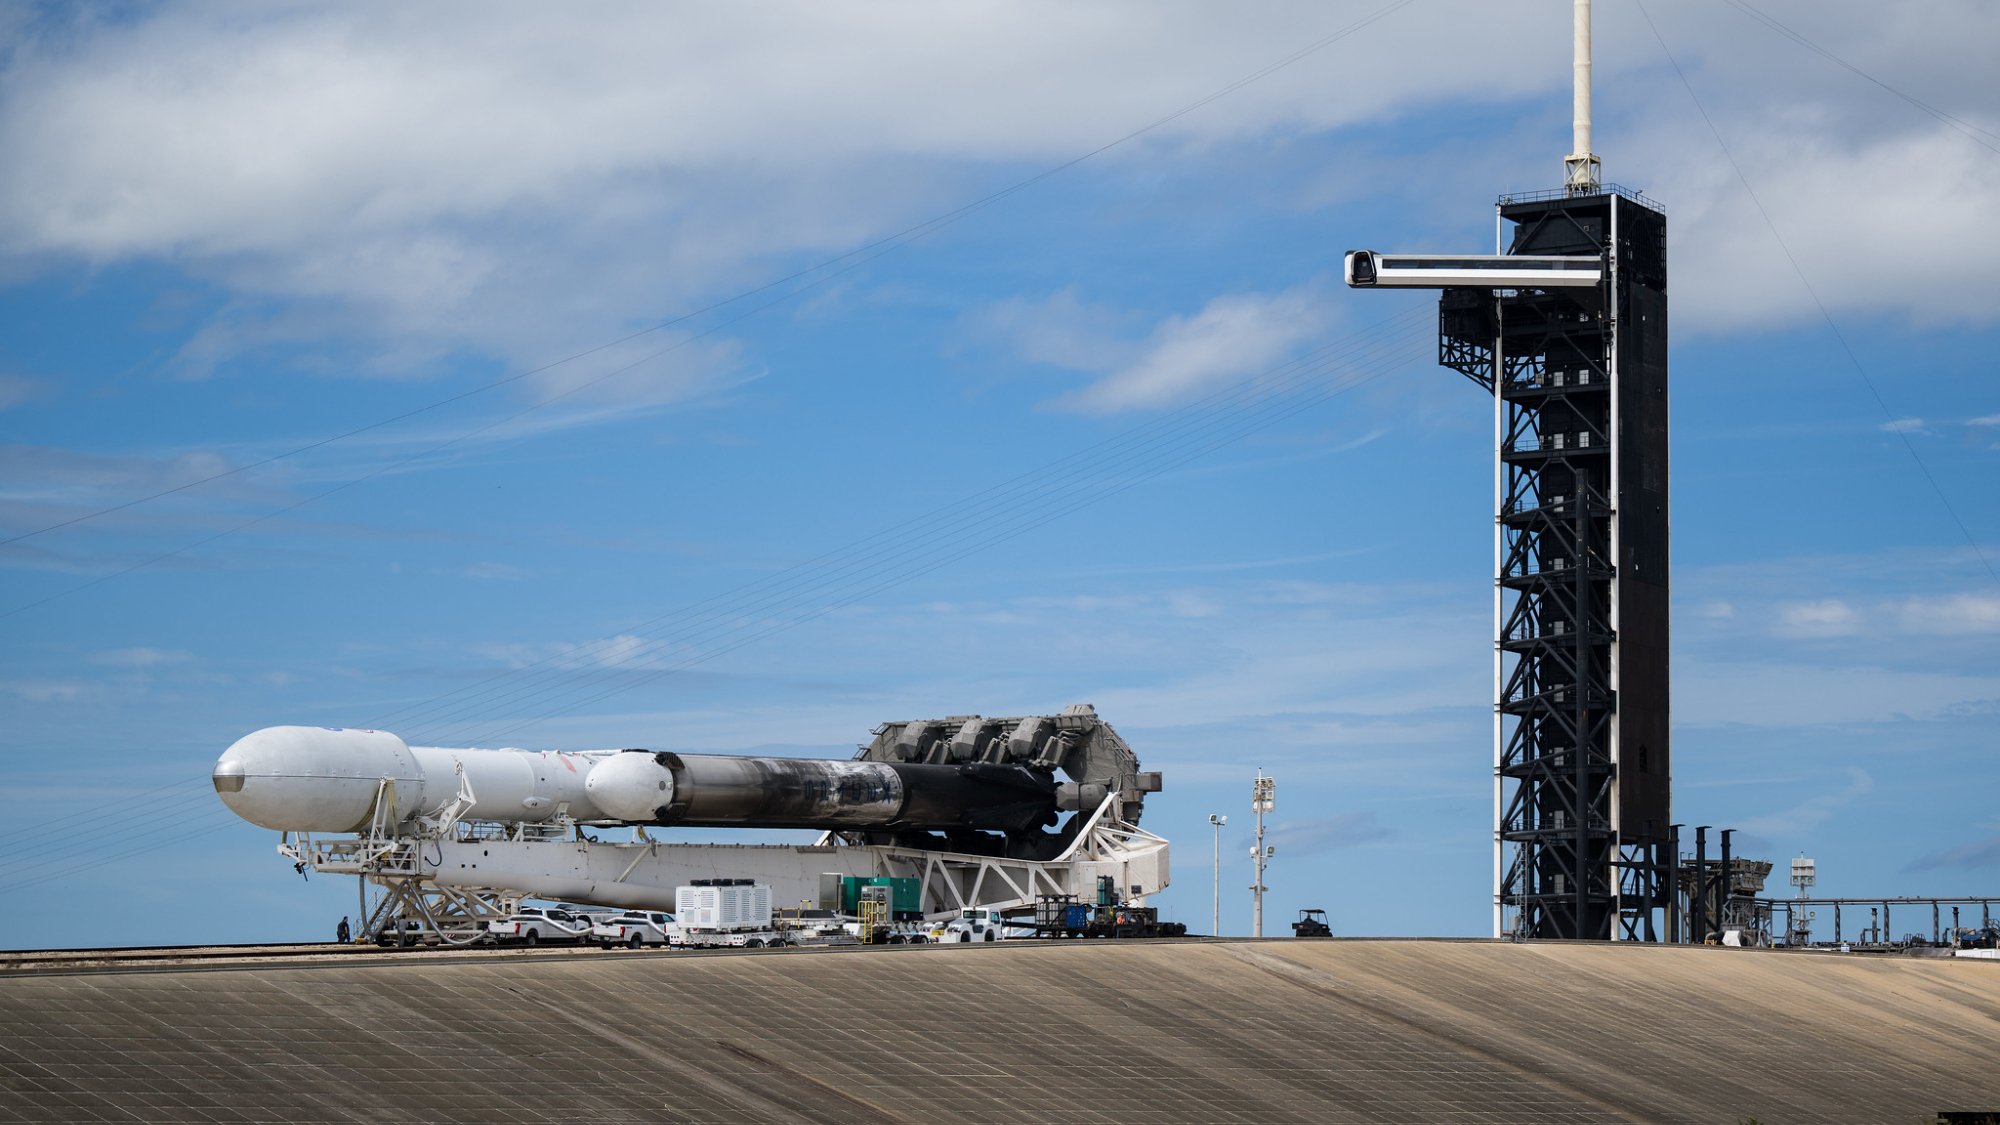 SpaceX rolls out Falcon Heavy rocket for Psyche asteroid mission launch (photos) Space